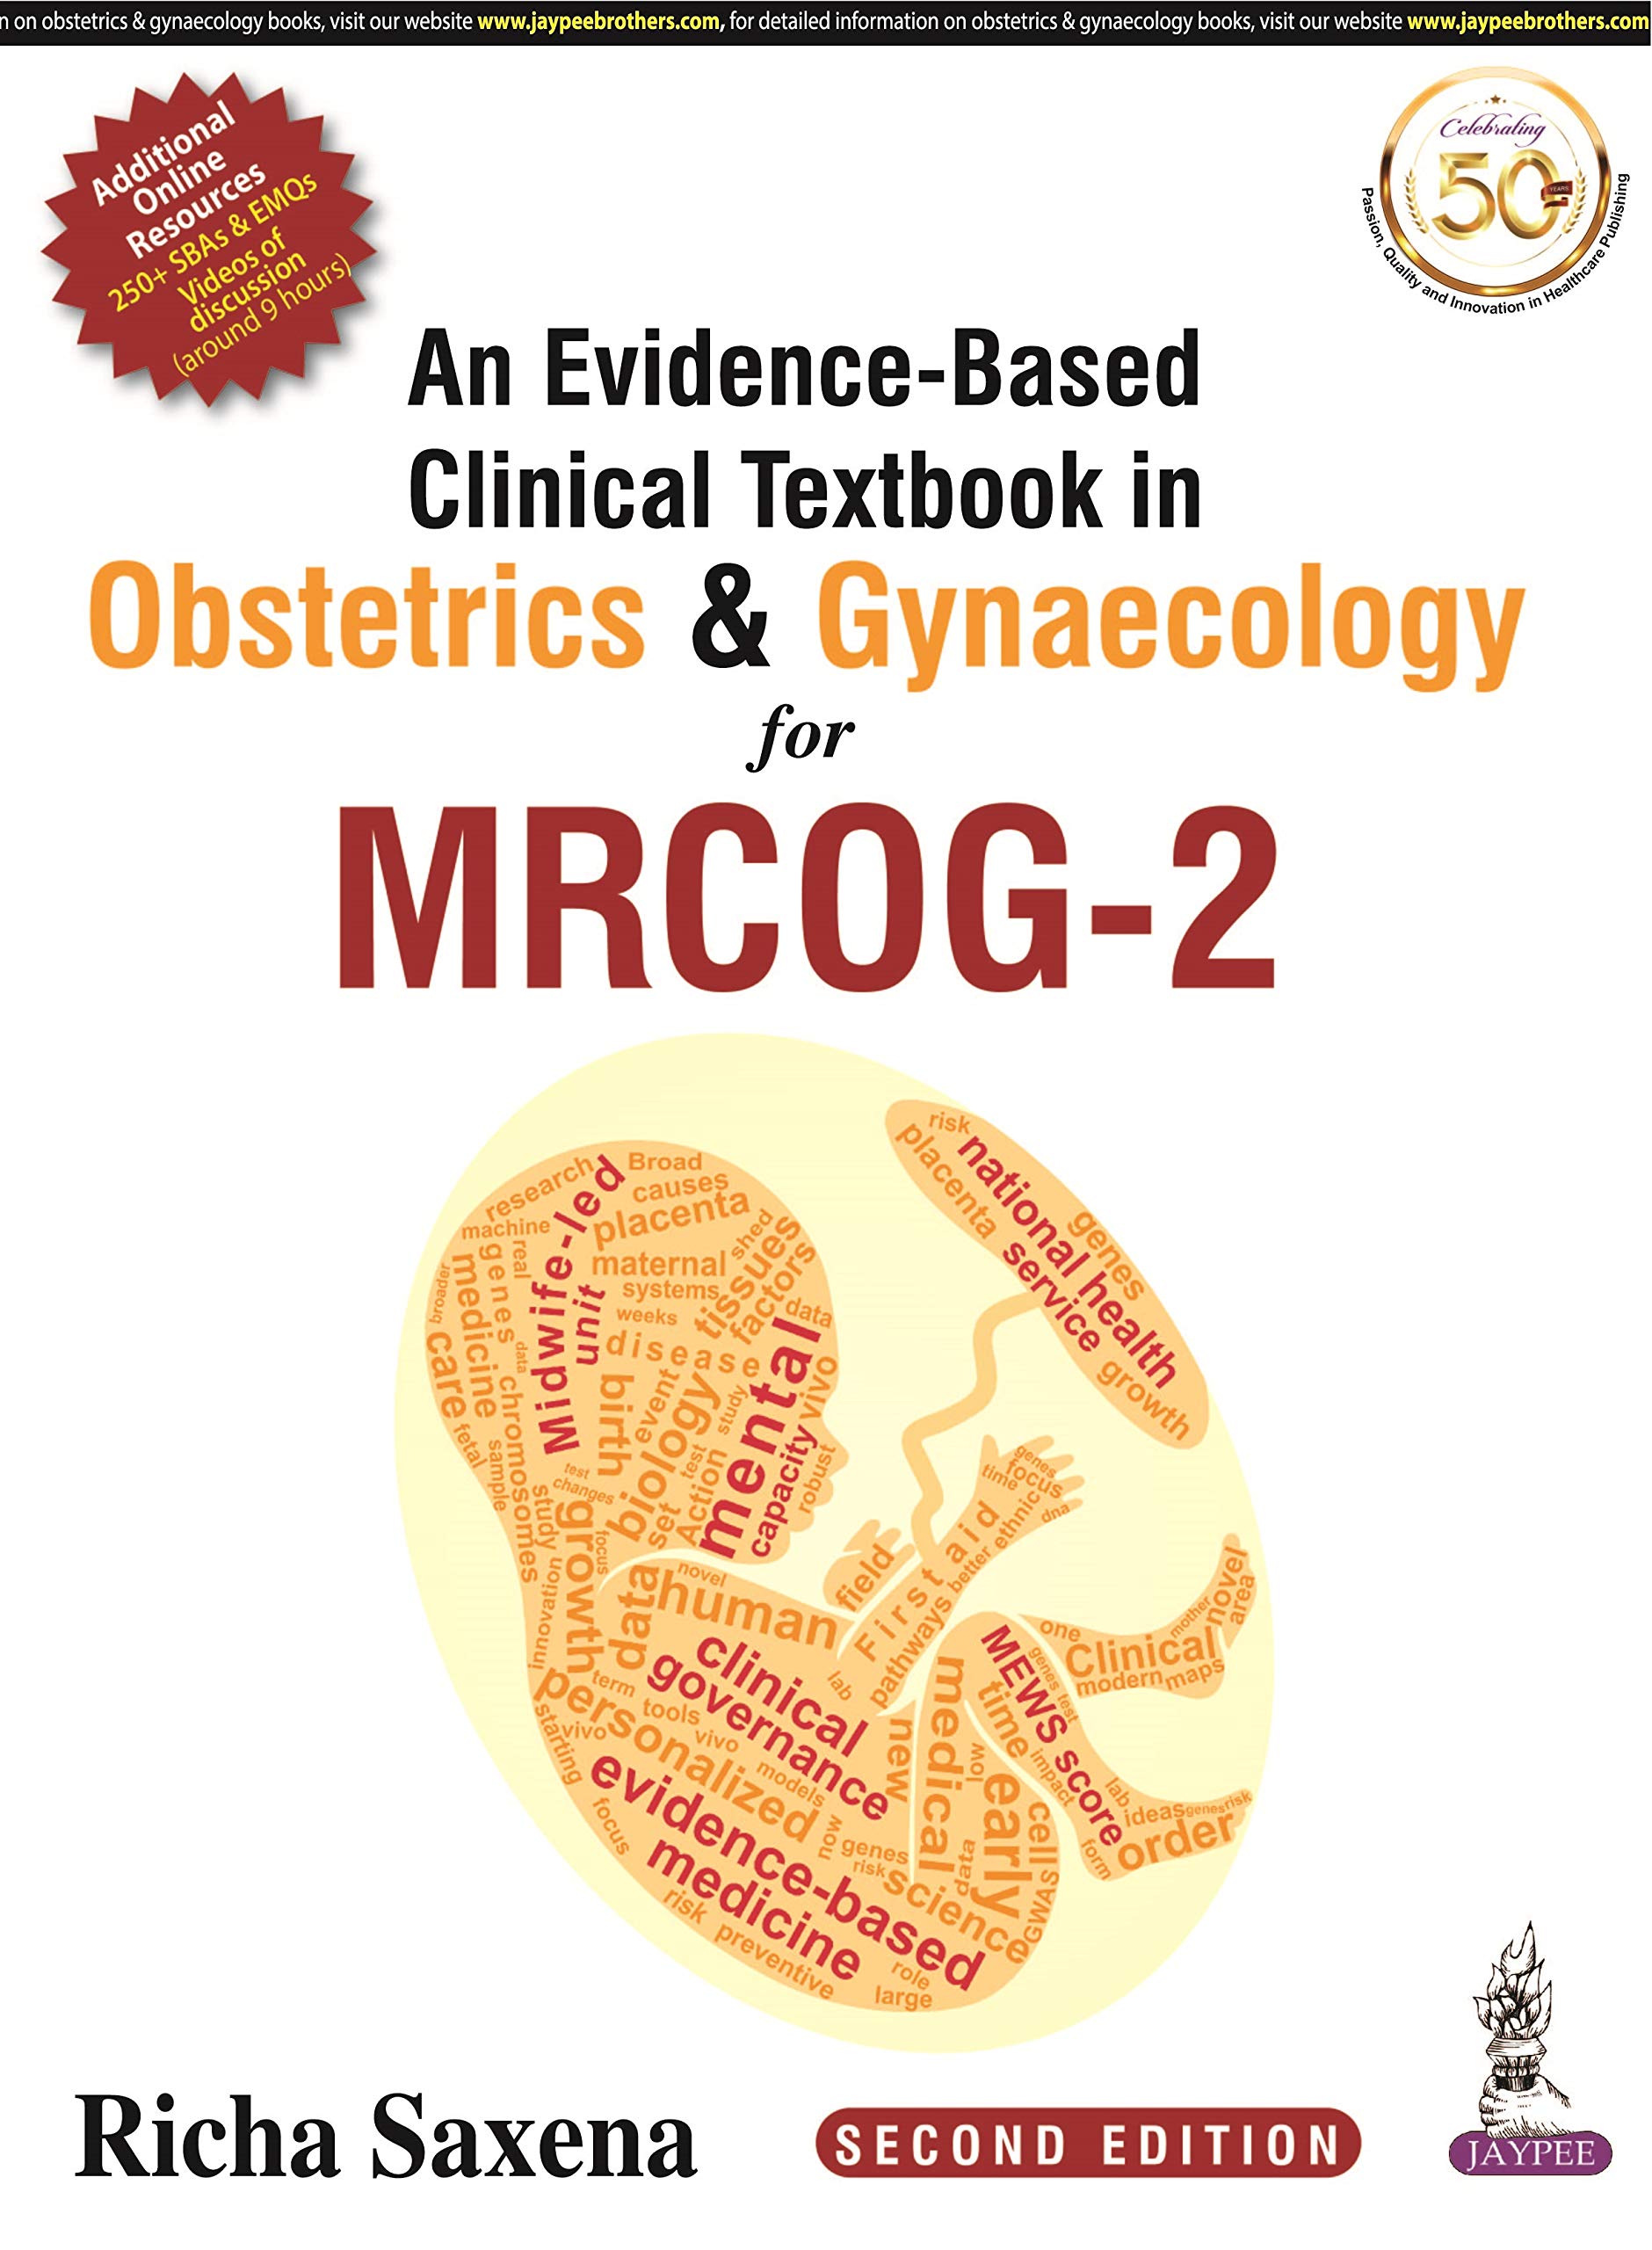 An Evidence-Based Clinical Textbook In Obstetrics & Gynaecology For Mrcog-2